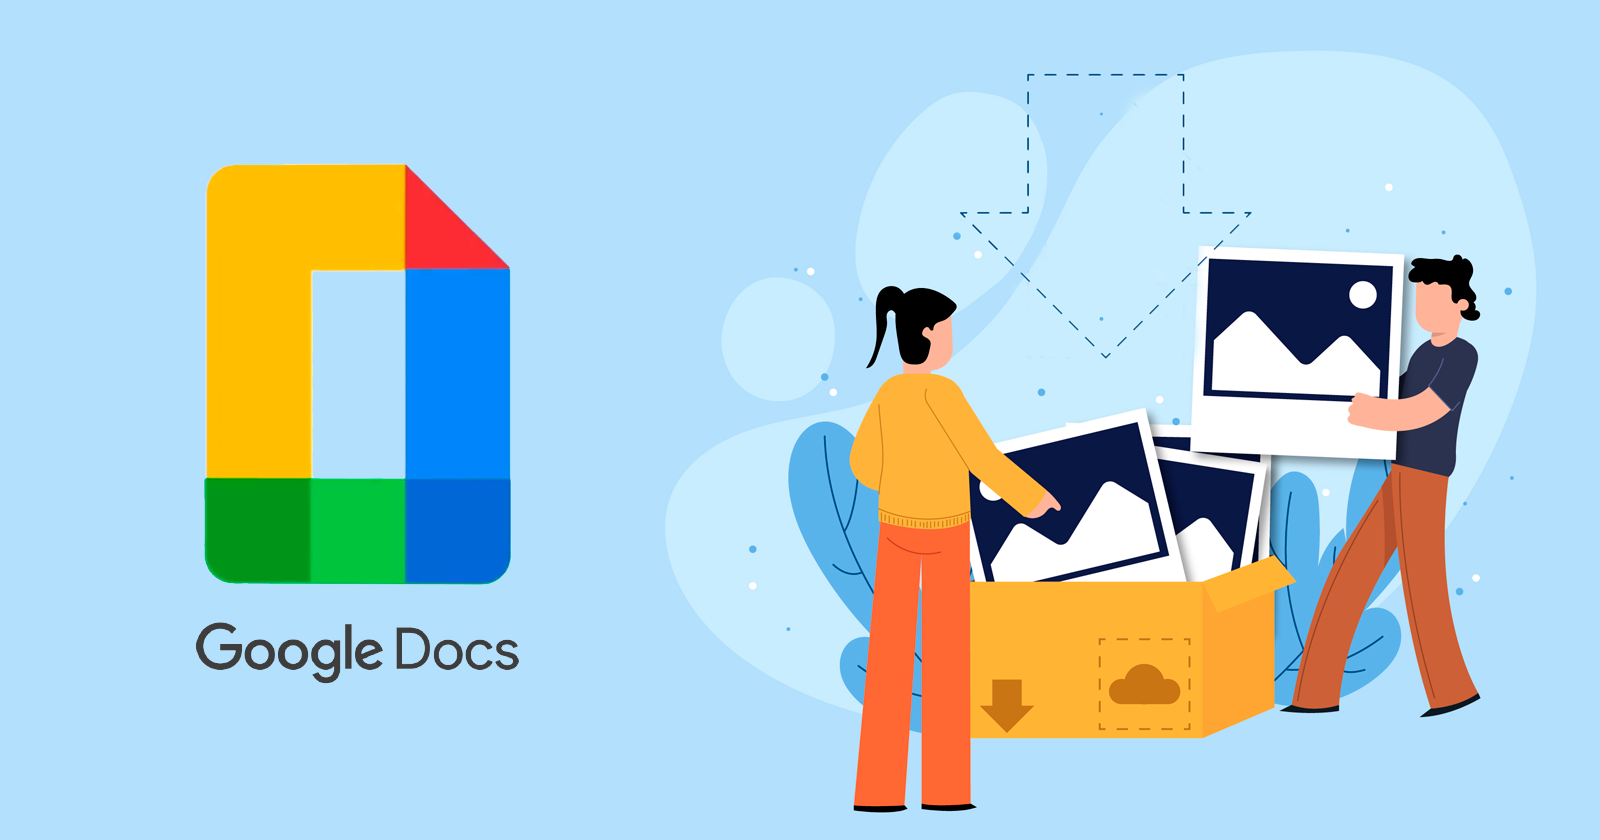 How to Save an Image from Google Docs – 4 Methods